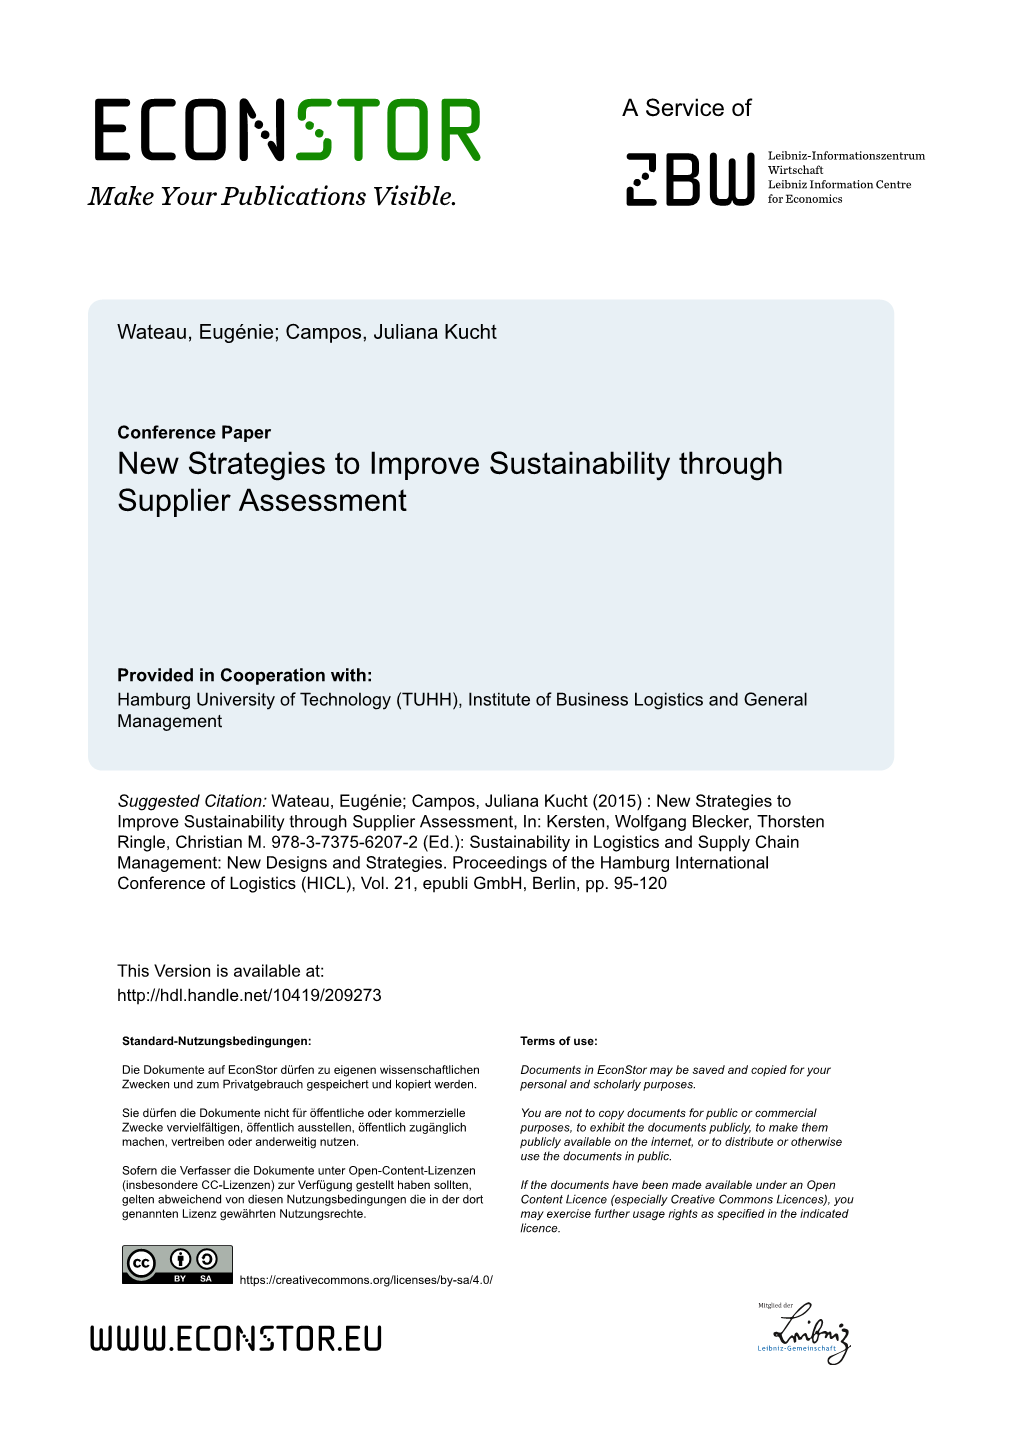 New Strategies to Improve Sustainability Through Supplier Assessment